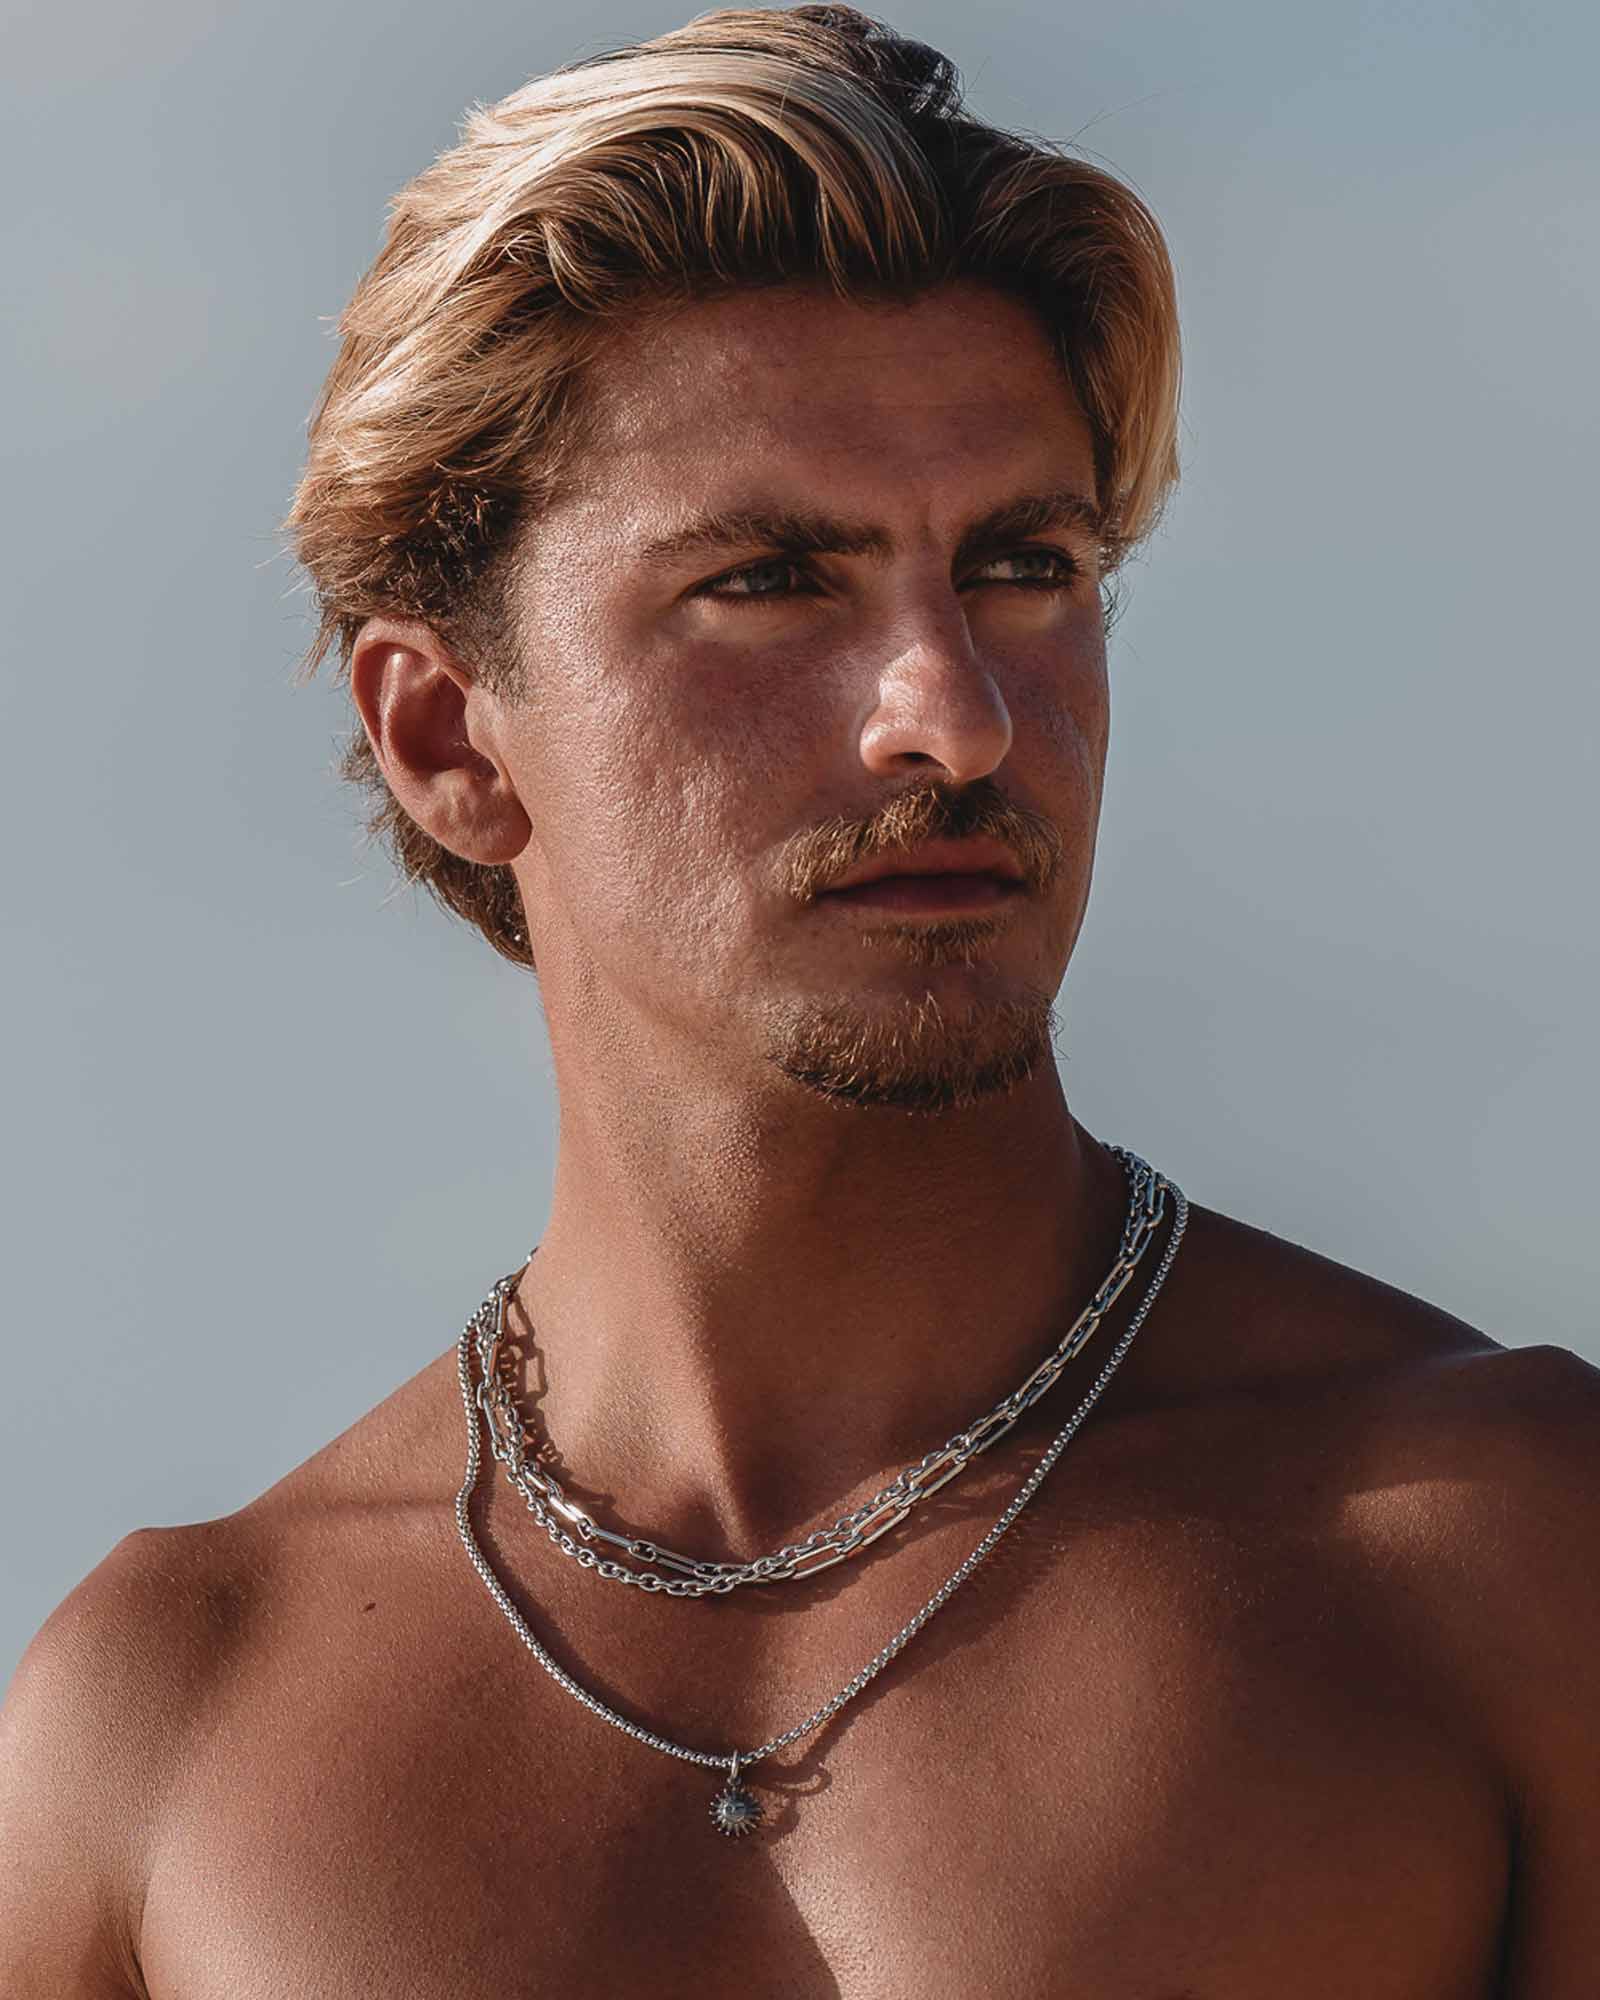 Sun Necklace - Stainless Steel Necklace with 'Sun' Pendant on the models neck - Online Unissex Jewelry - Dicci